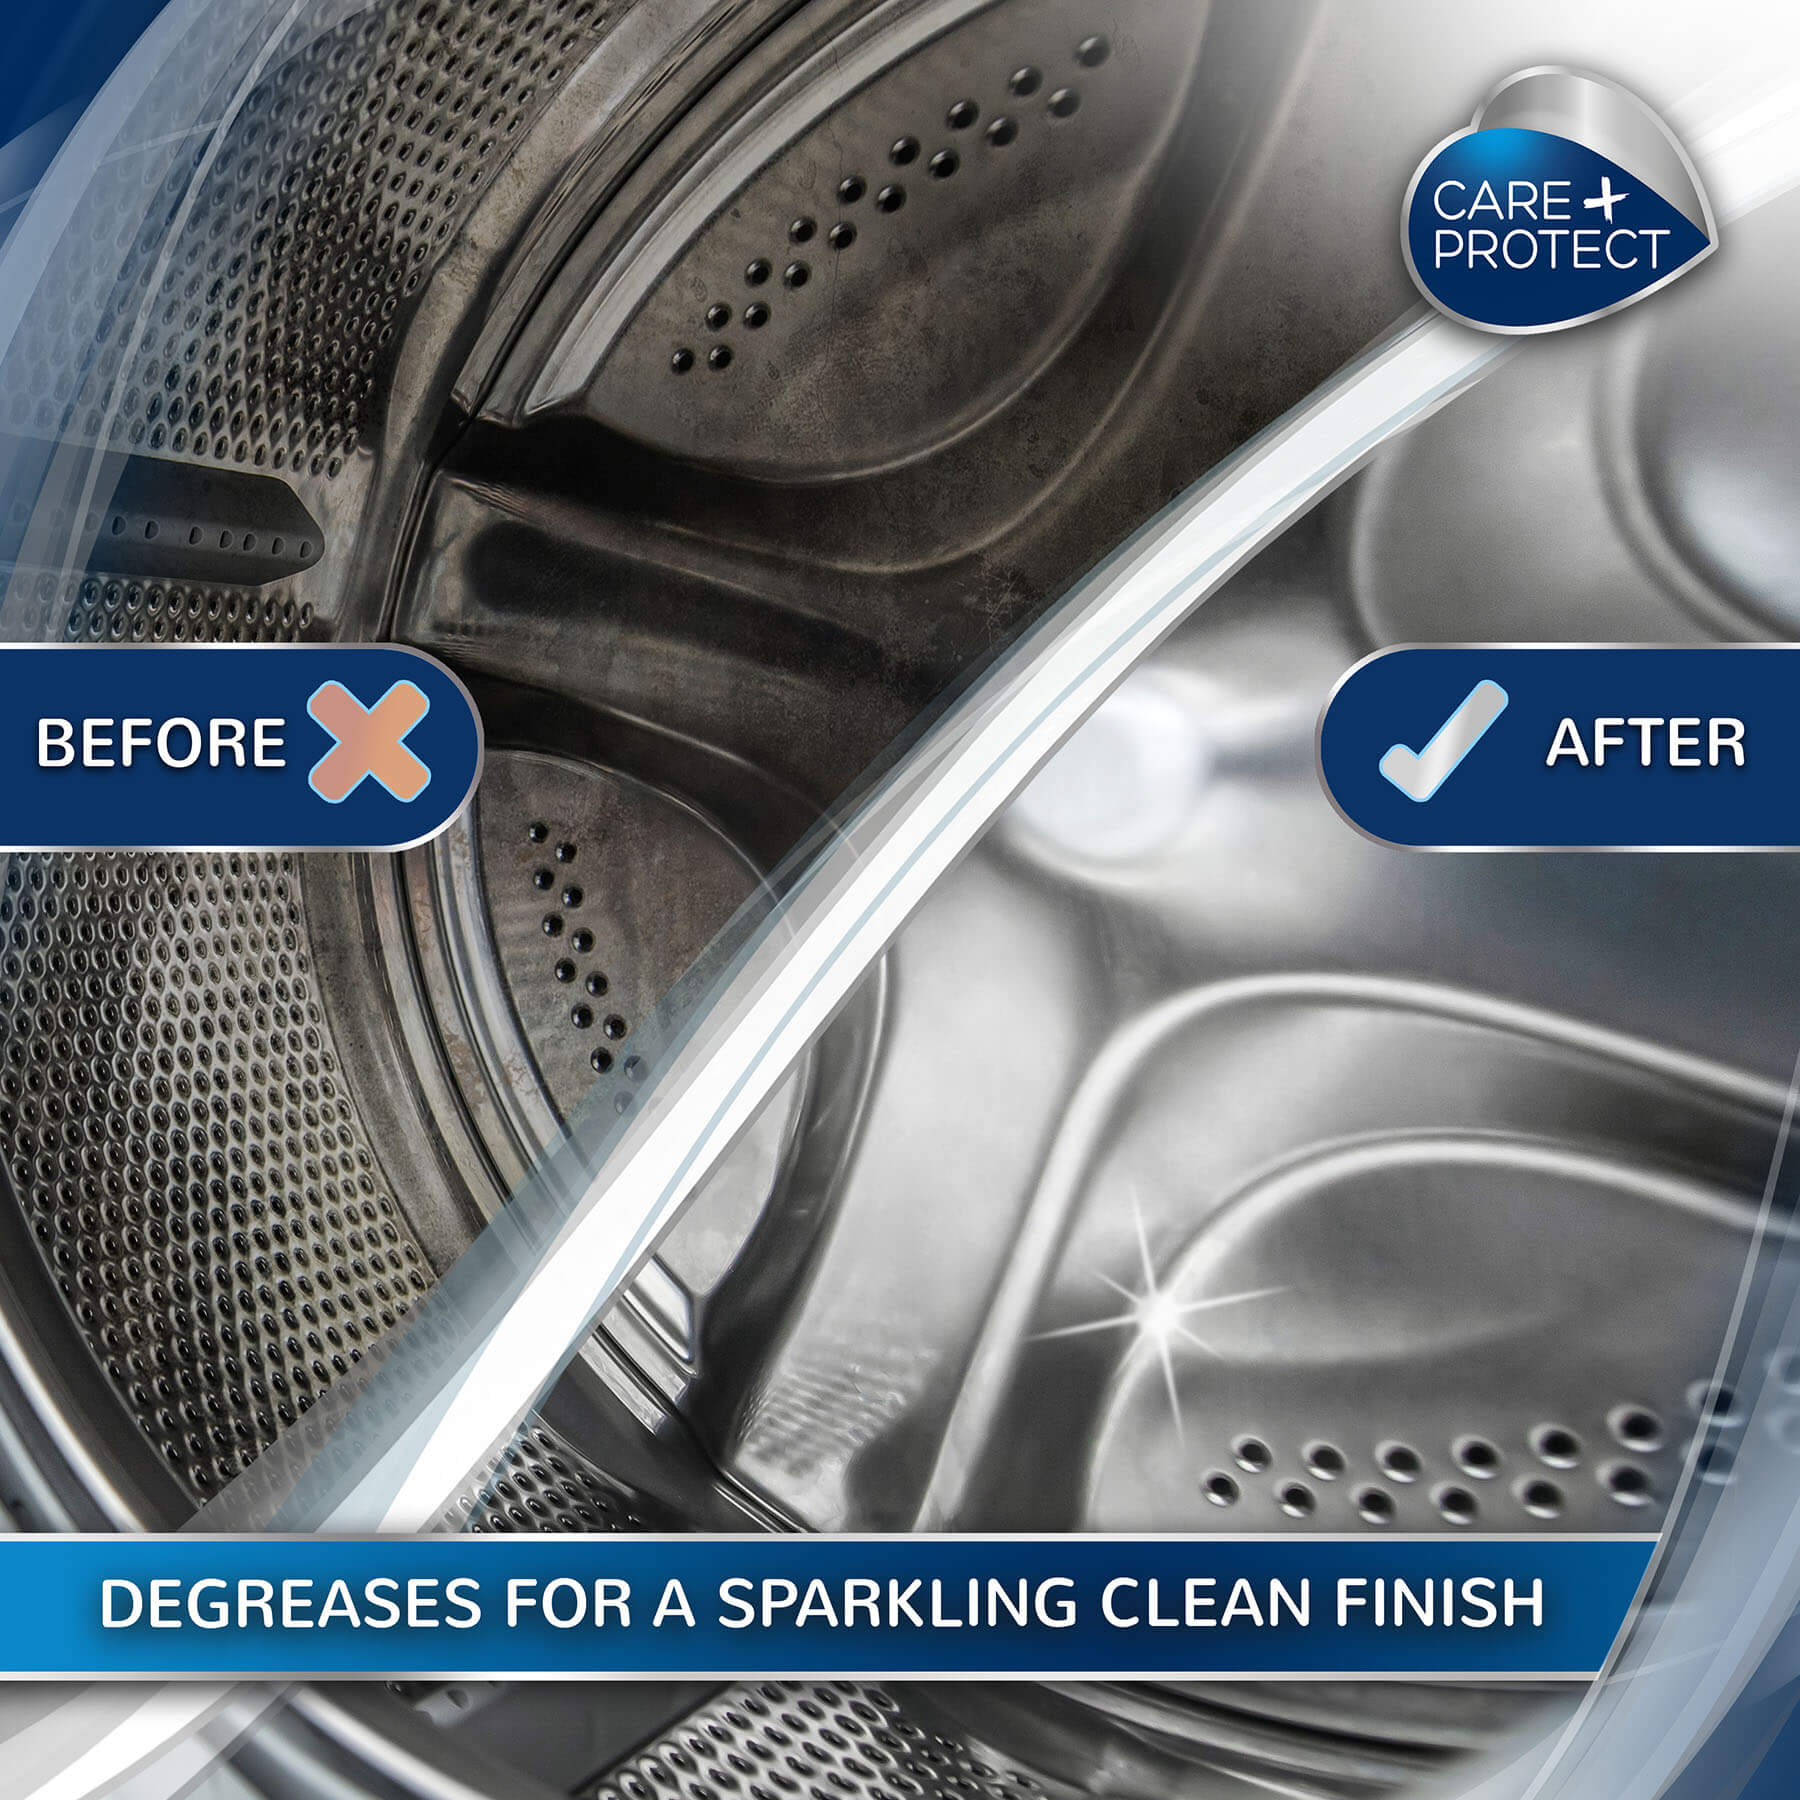 Degreases for a sparkling clean finish